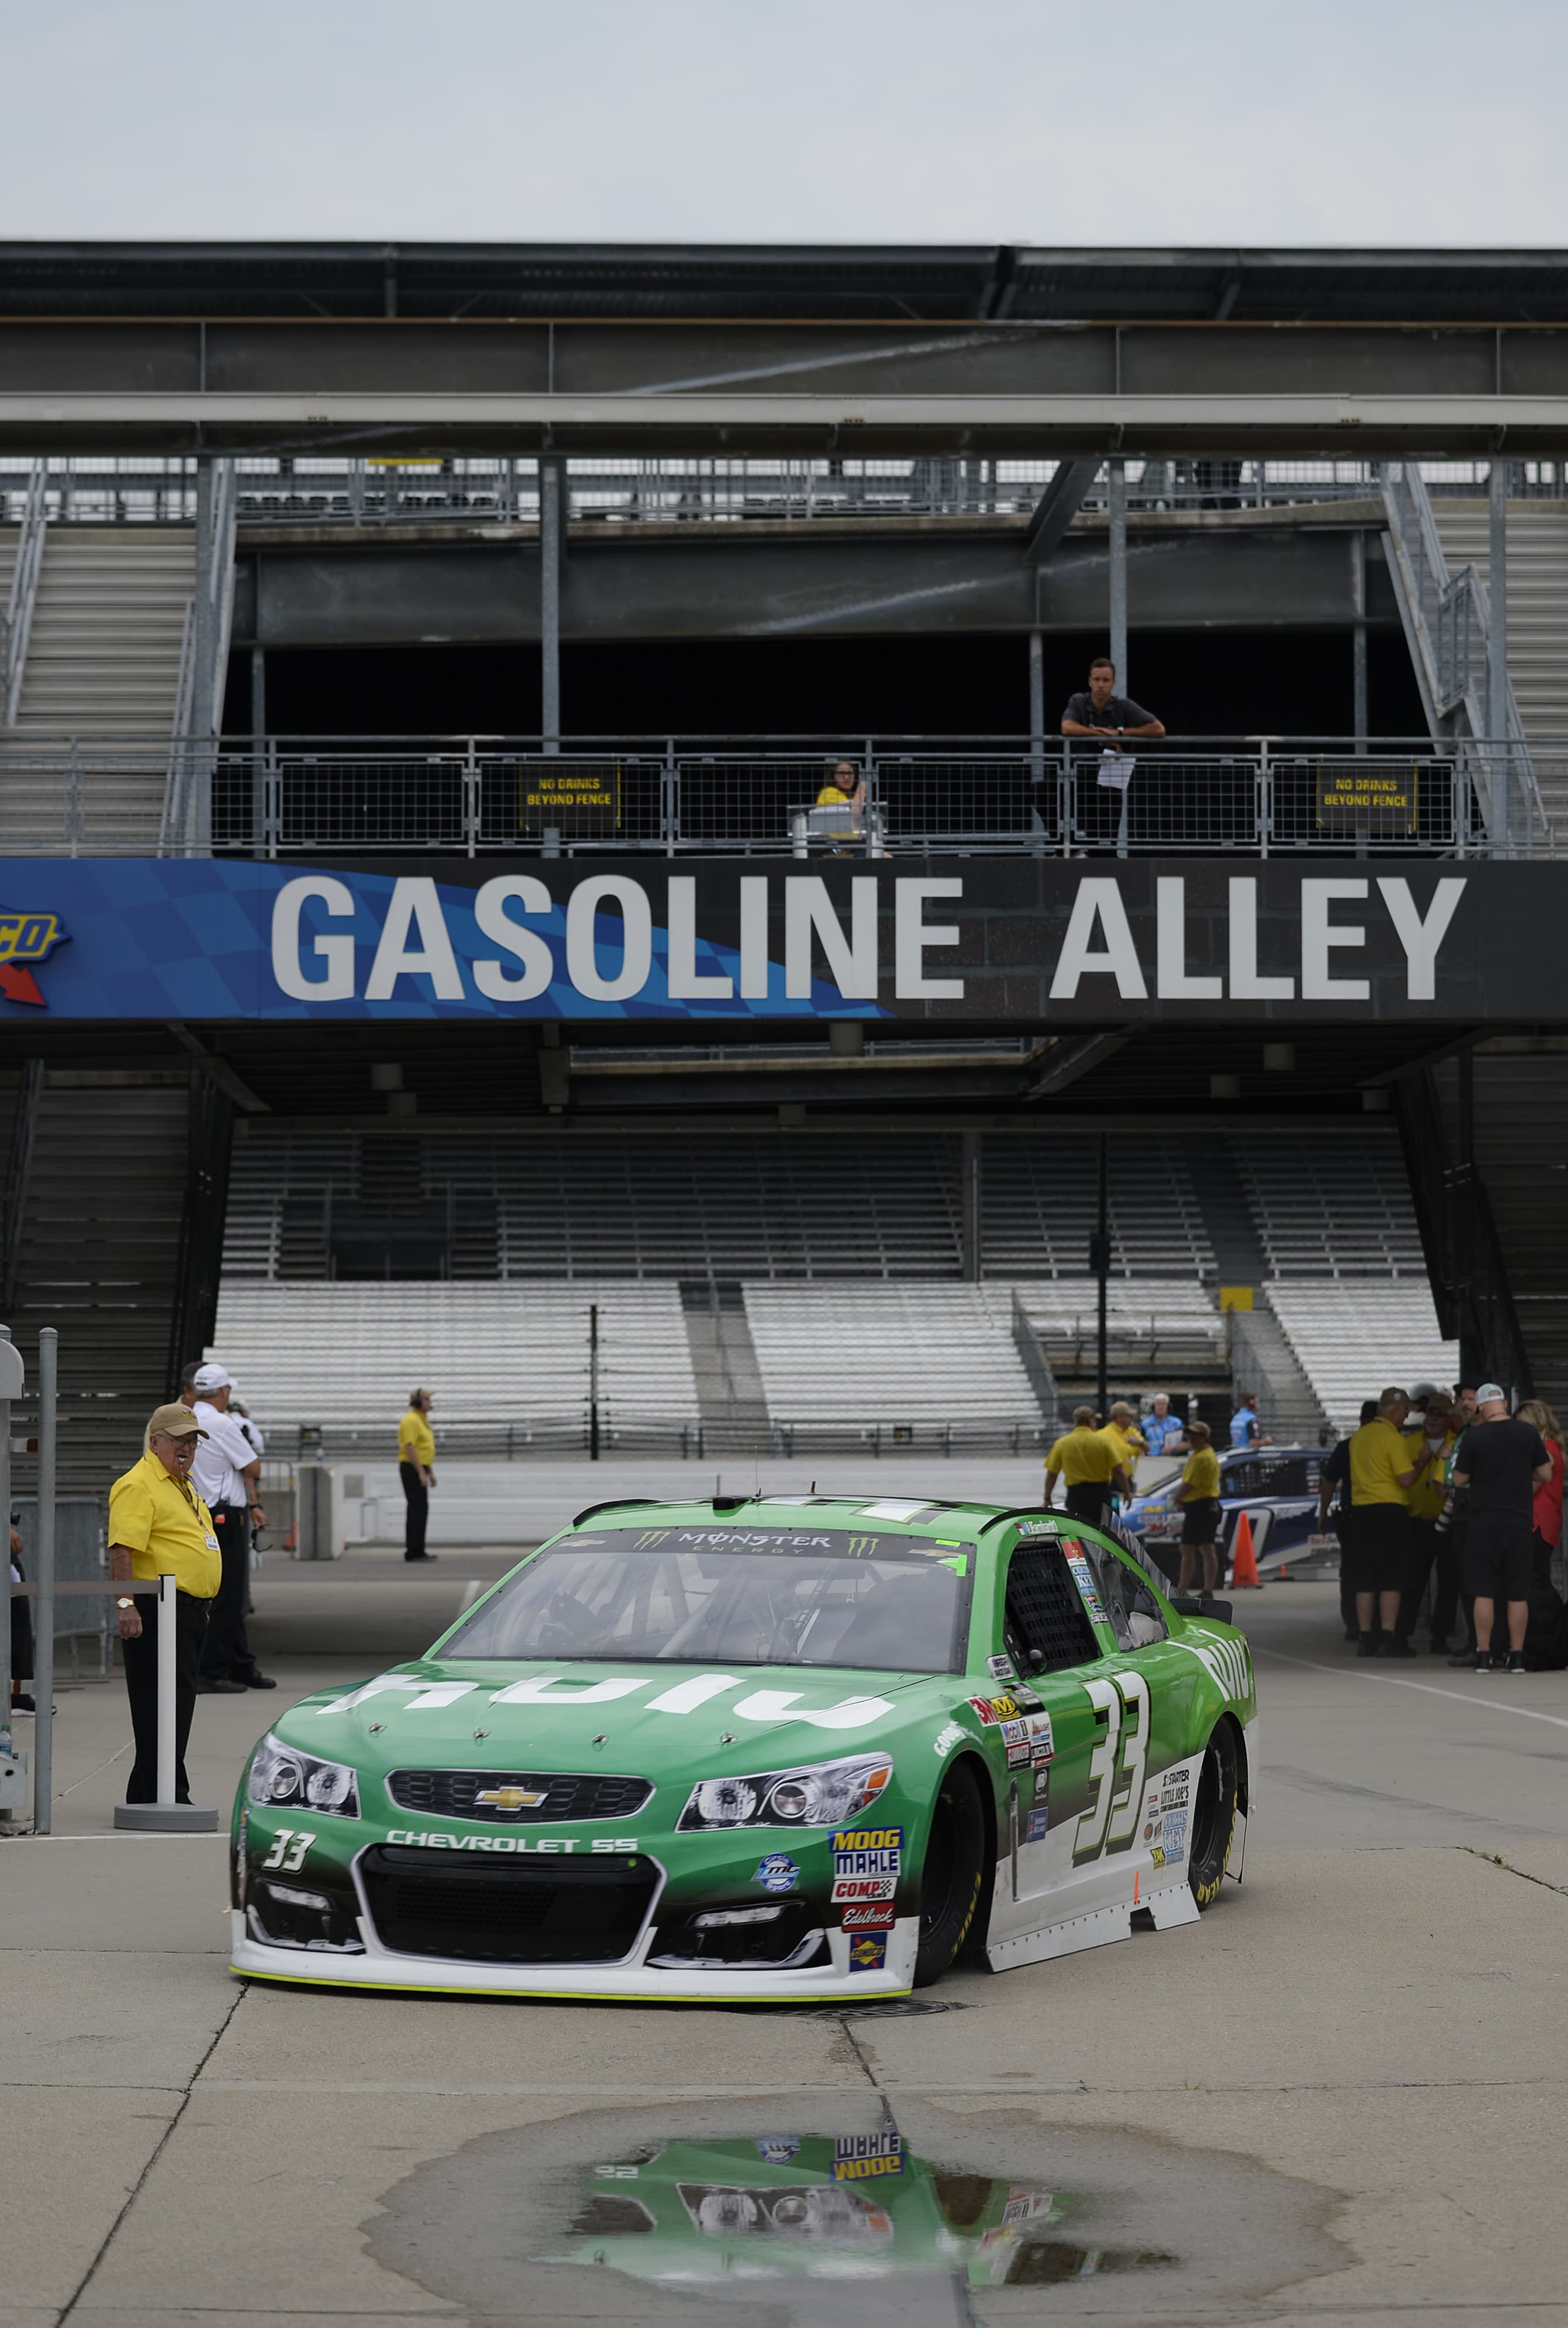 Saturday at the Brickyard/ Lilly Diabetes 2502017 Monster Energy NASCAR Cup Series